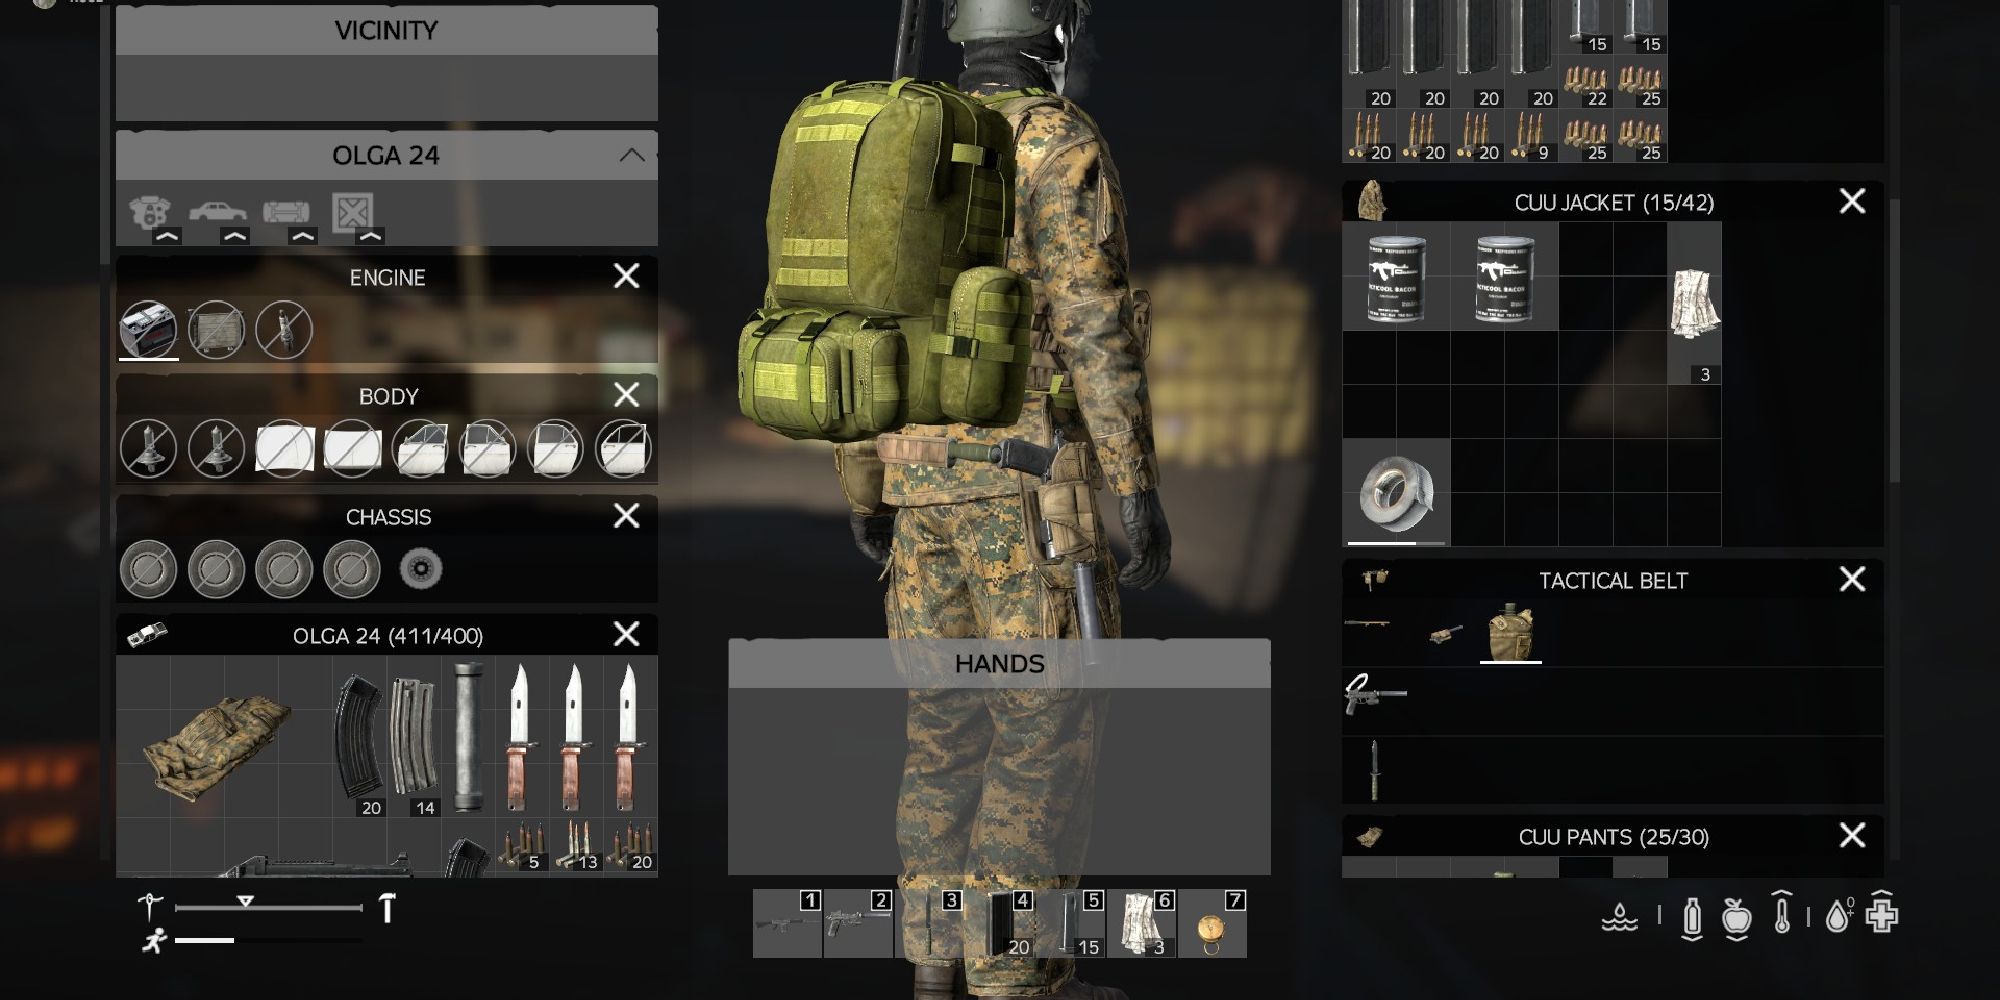 In-game screenshot of the player wearing the backpack, showing inventory slots.